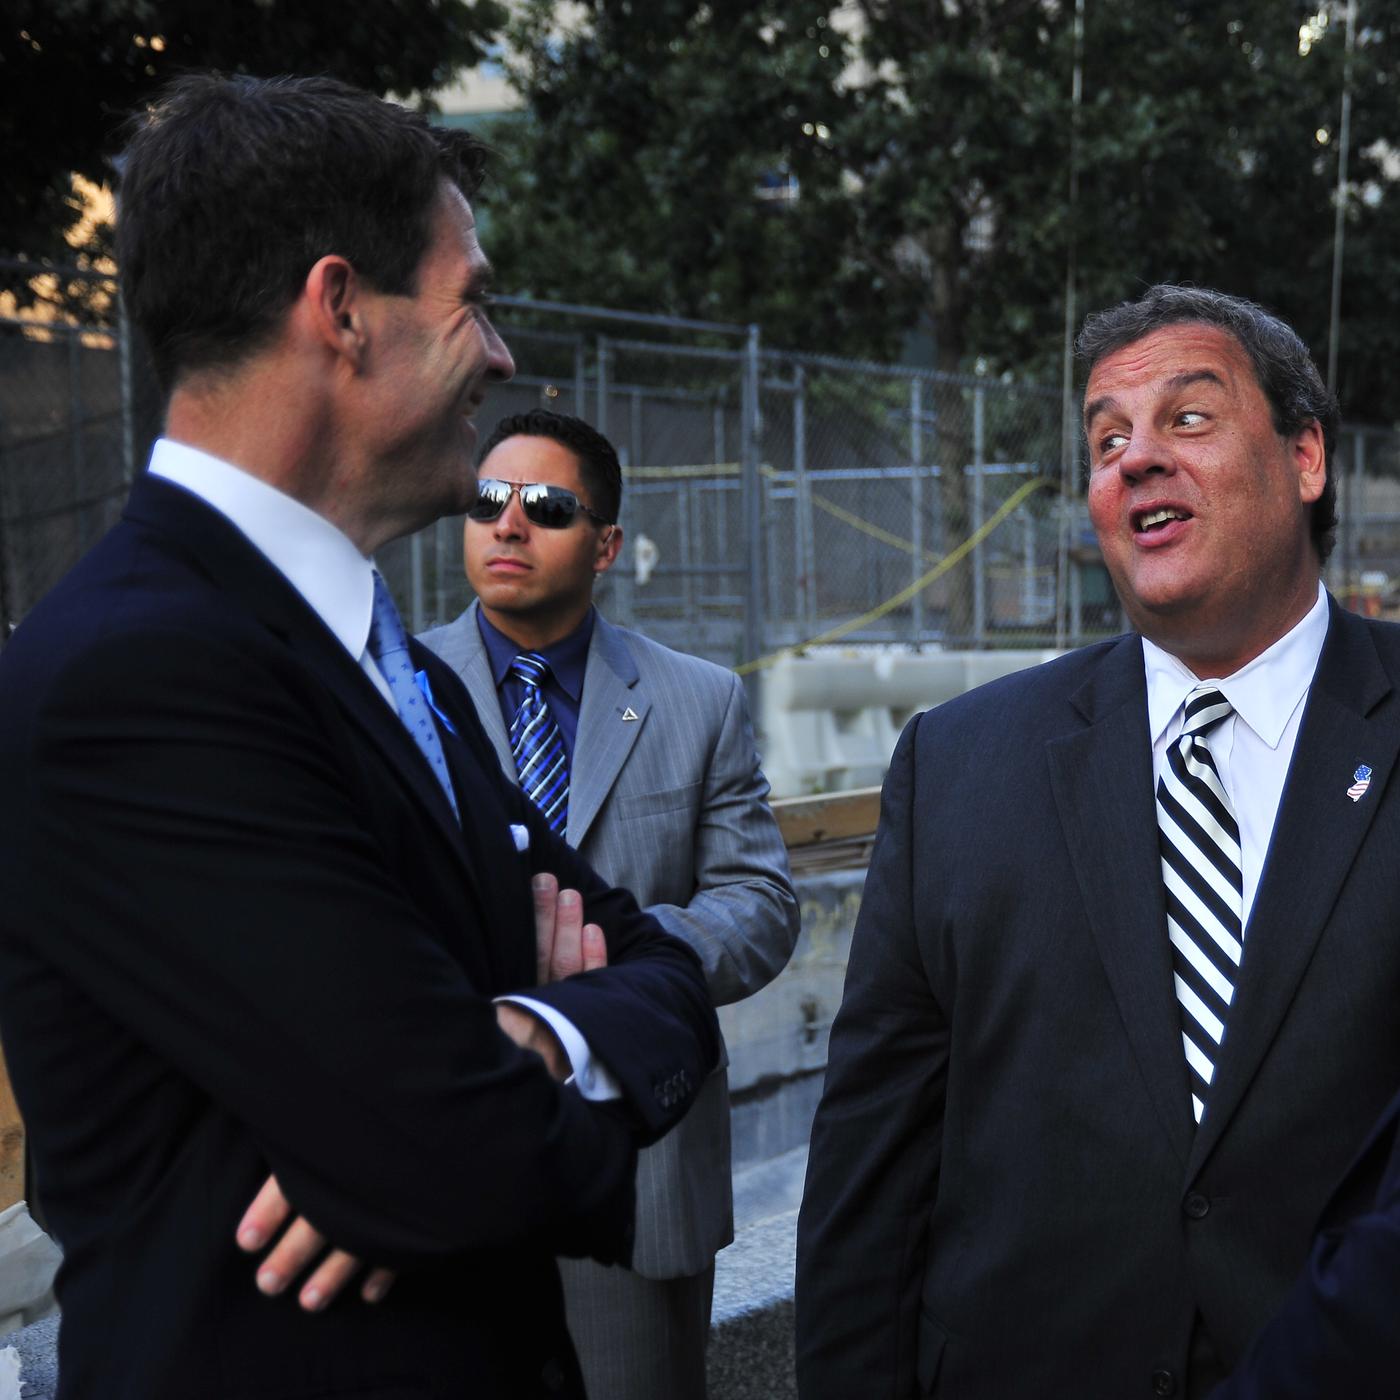 Baroni Takes The Stand: Bridgegate Defendant Expresses 'Regret,' Says
He Was Duped